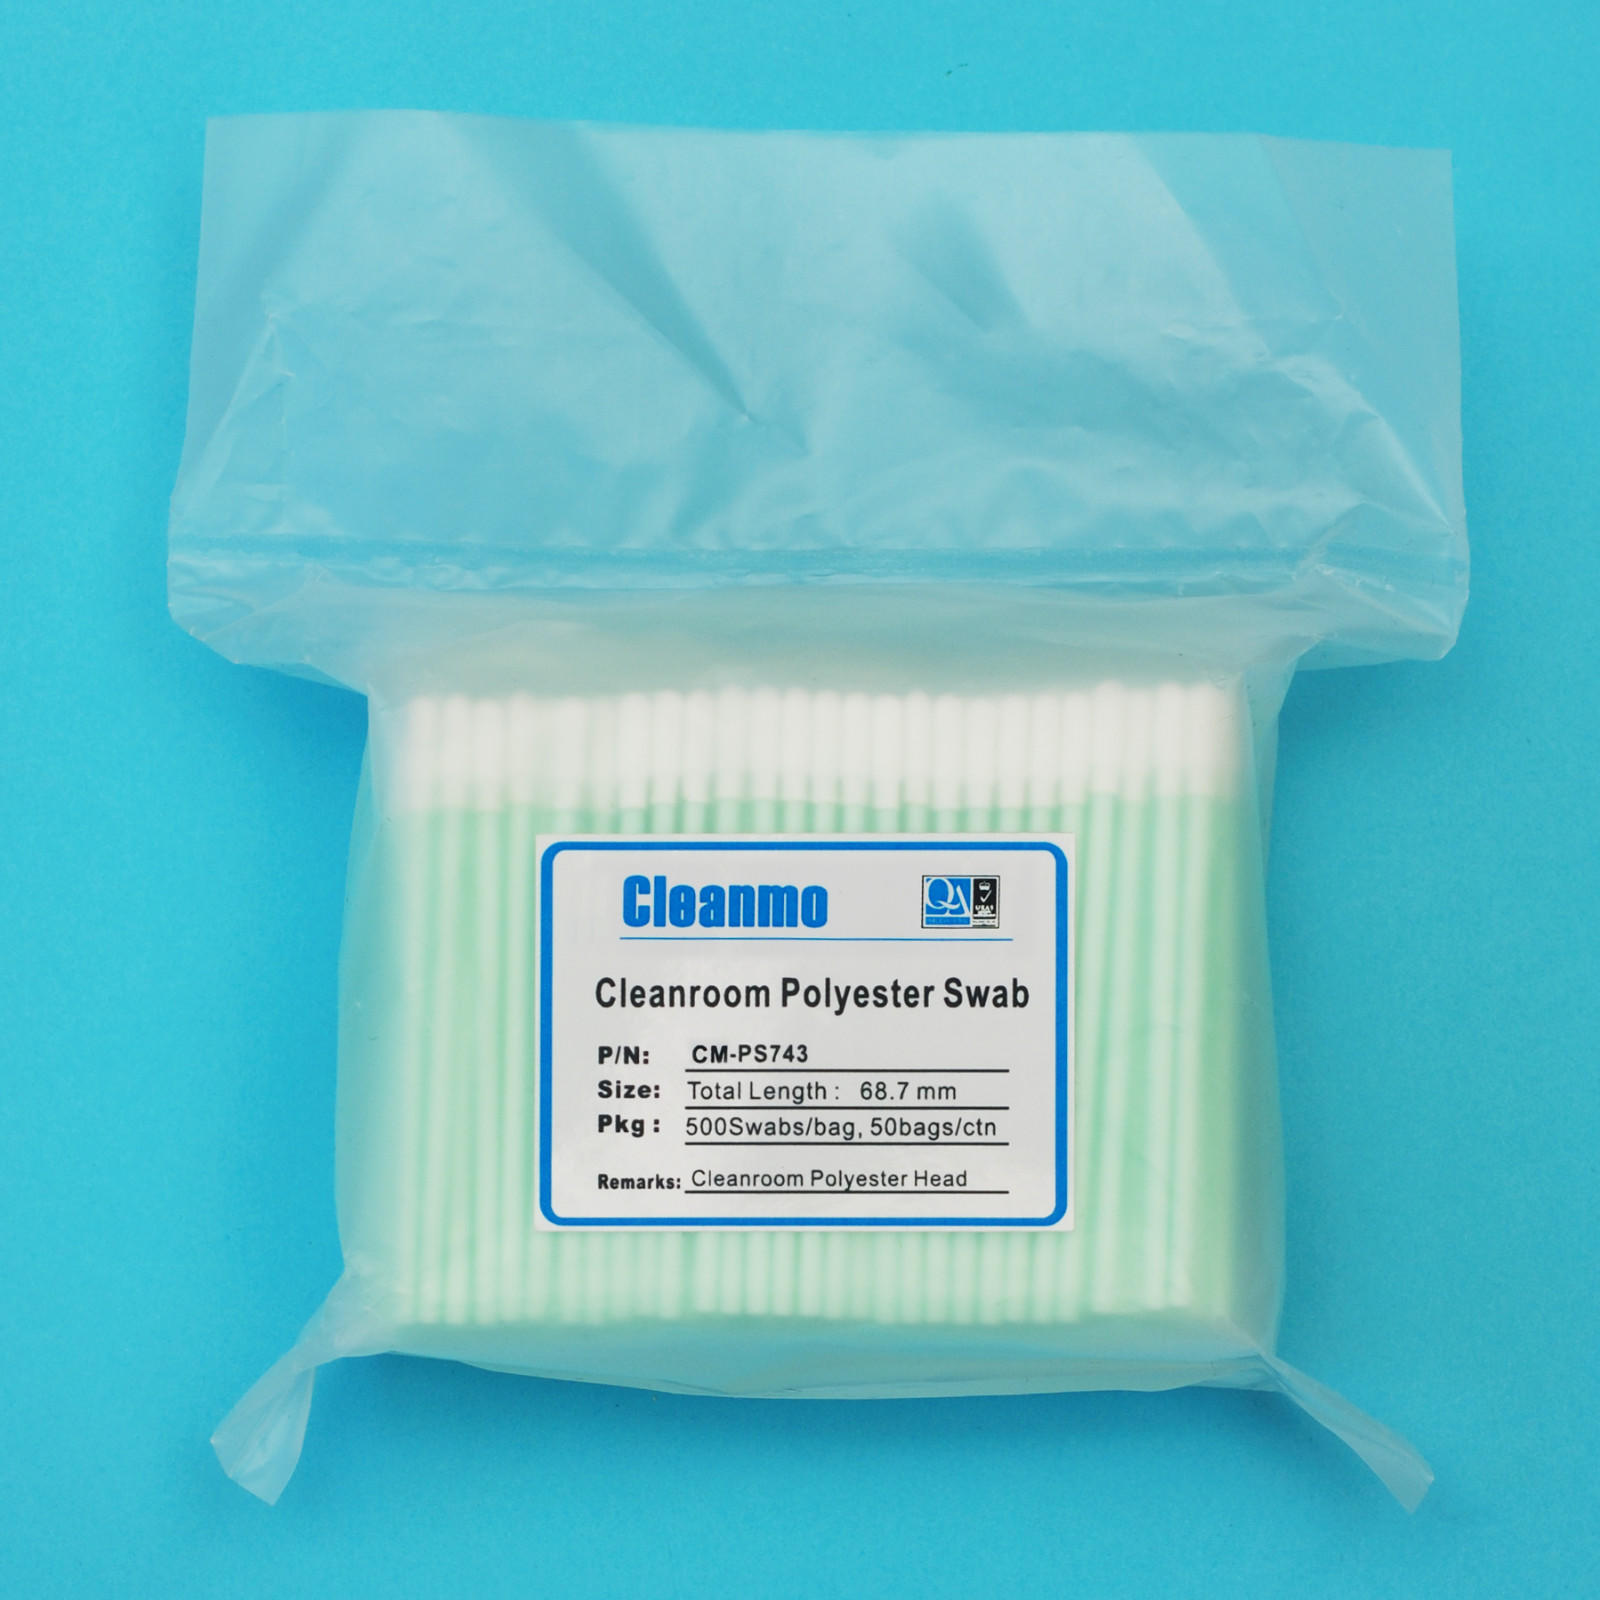 cmps714 polyester tx707 Cleanmo Brand electronics swap manufacture